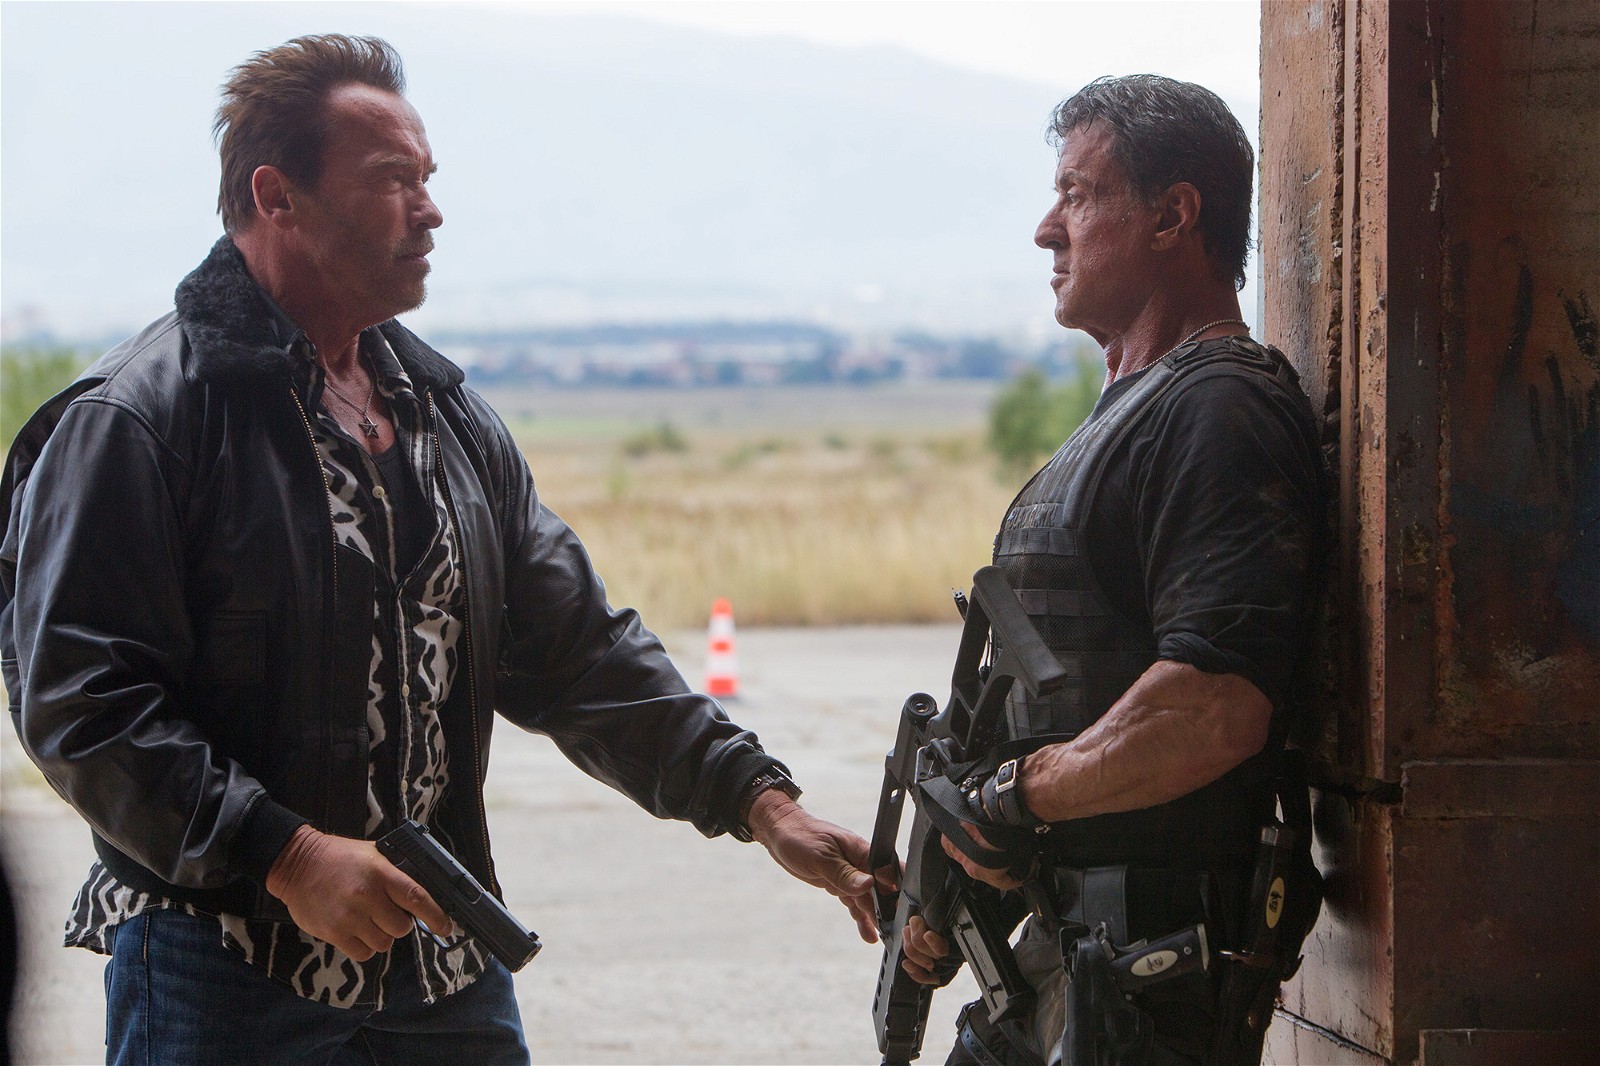 Sylvester Stallone and Arnold Schwarzenegger in a still from The Expendables